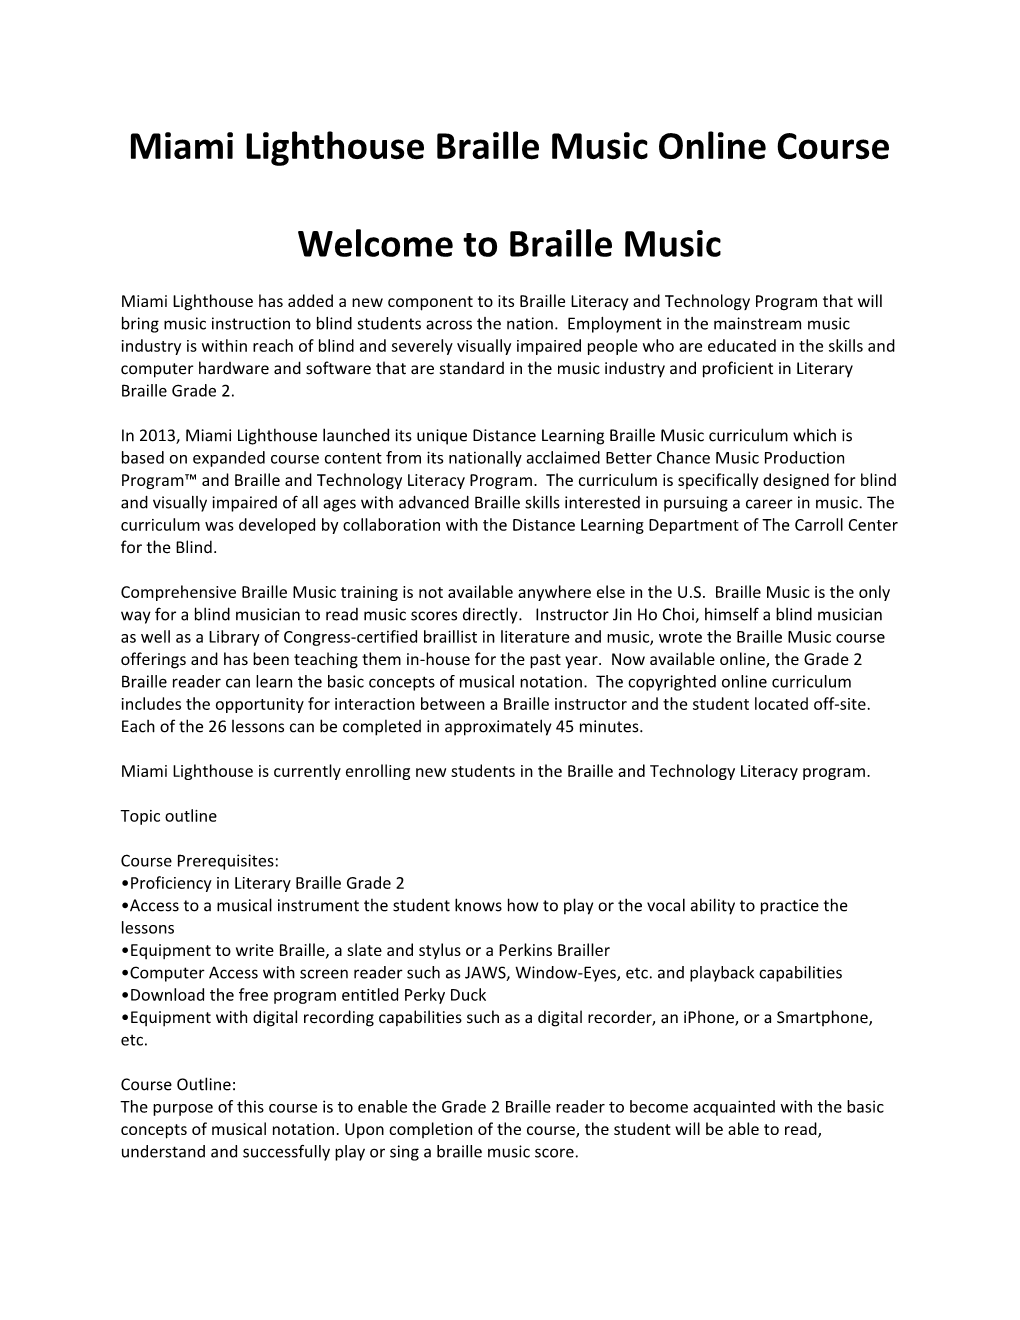 Miami Lighthouse Braille Music Online Course Welcome to Braille Music